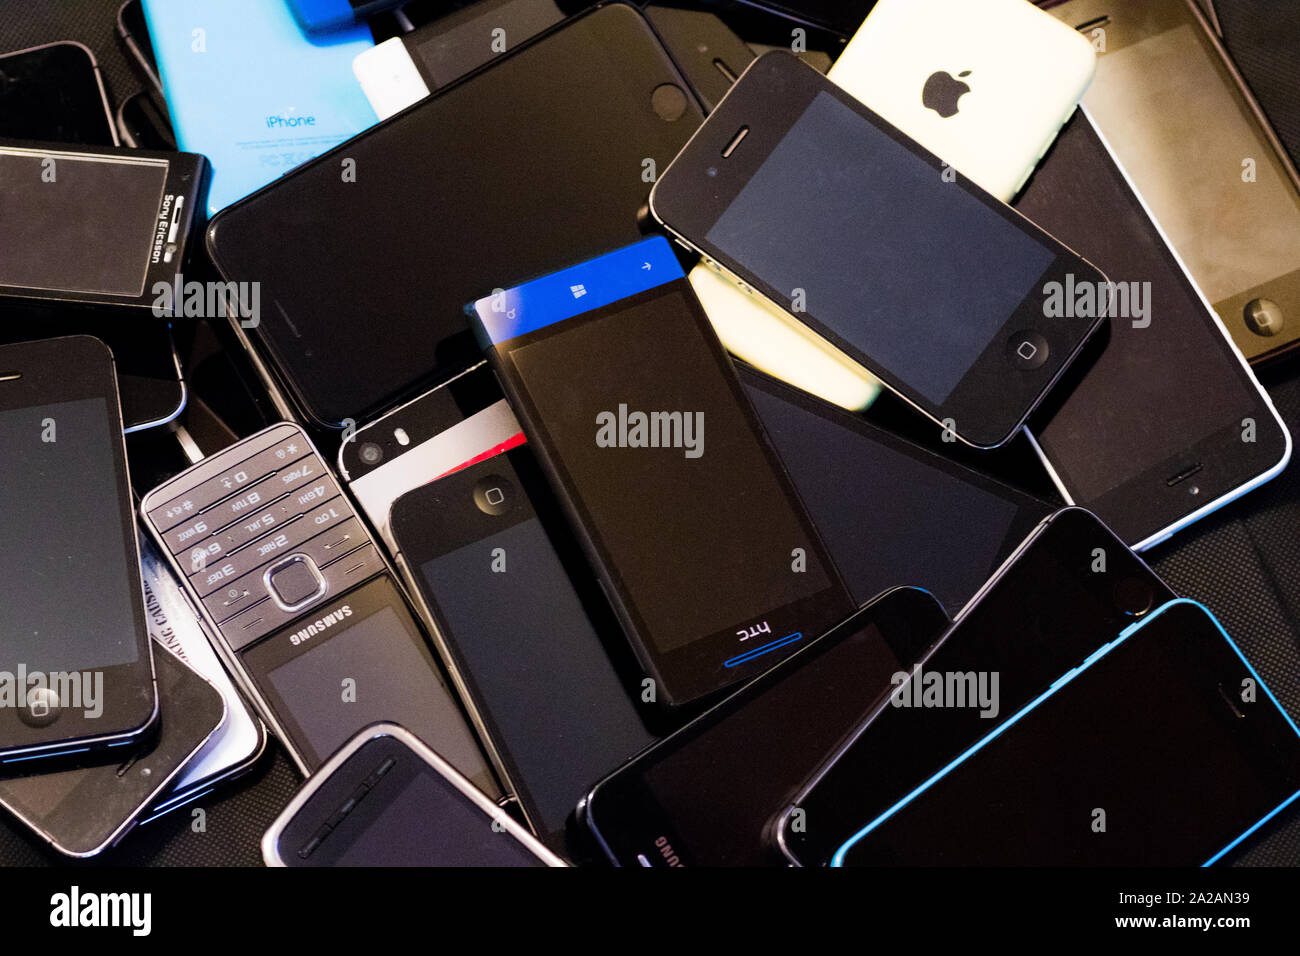 Mobile phones in a pile Stock Photo